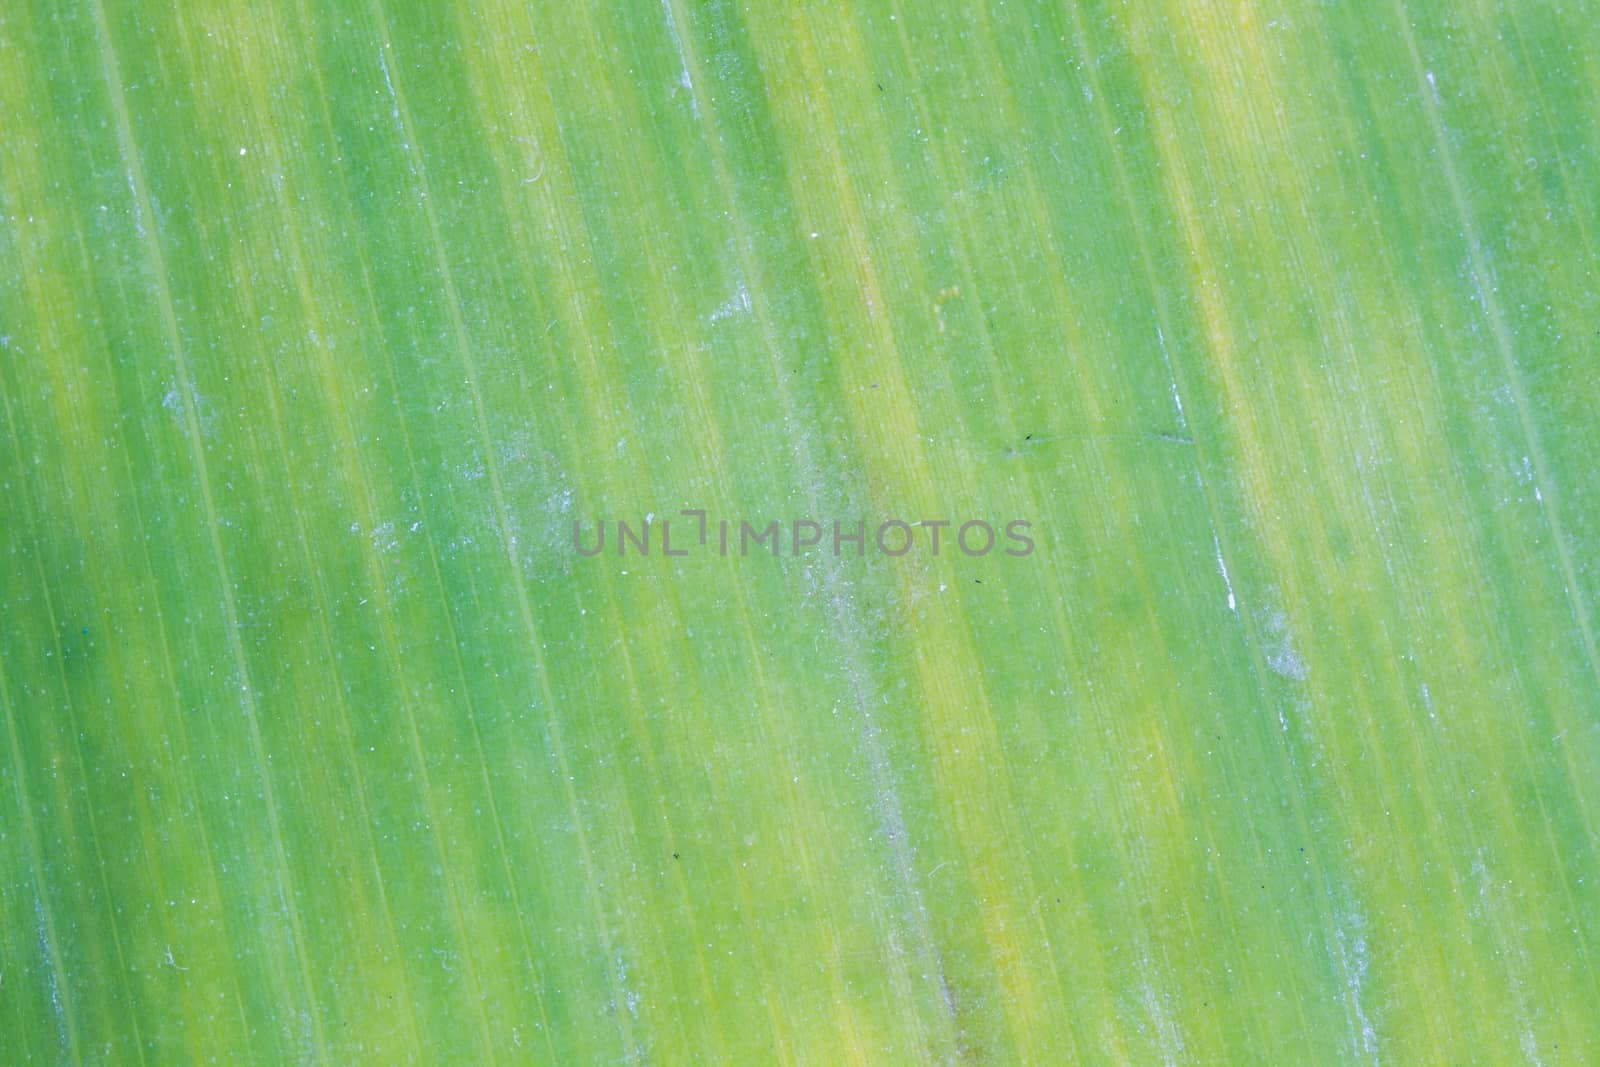 Banana leaf background with lines by a3701027